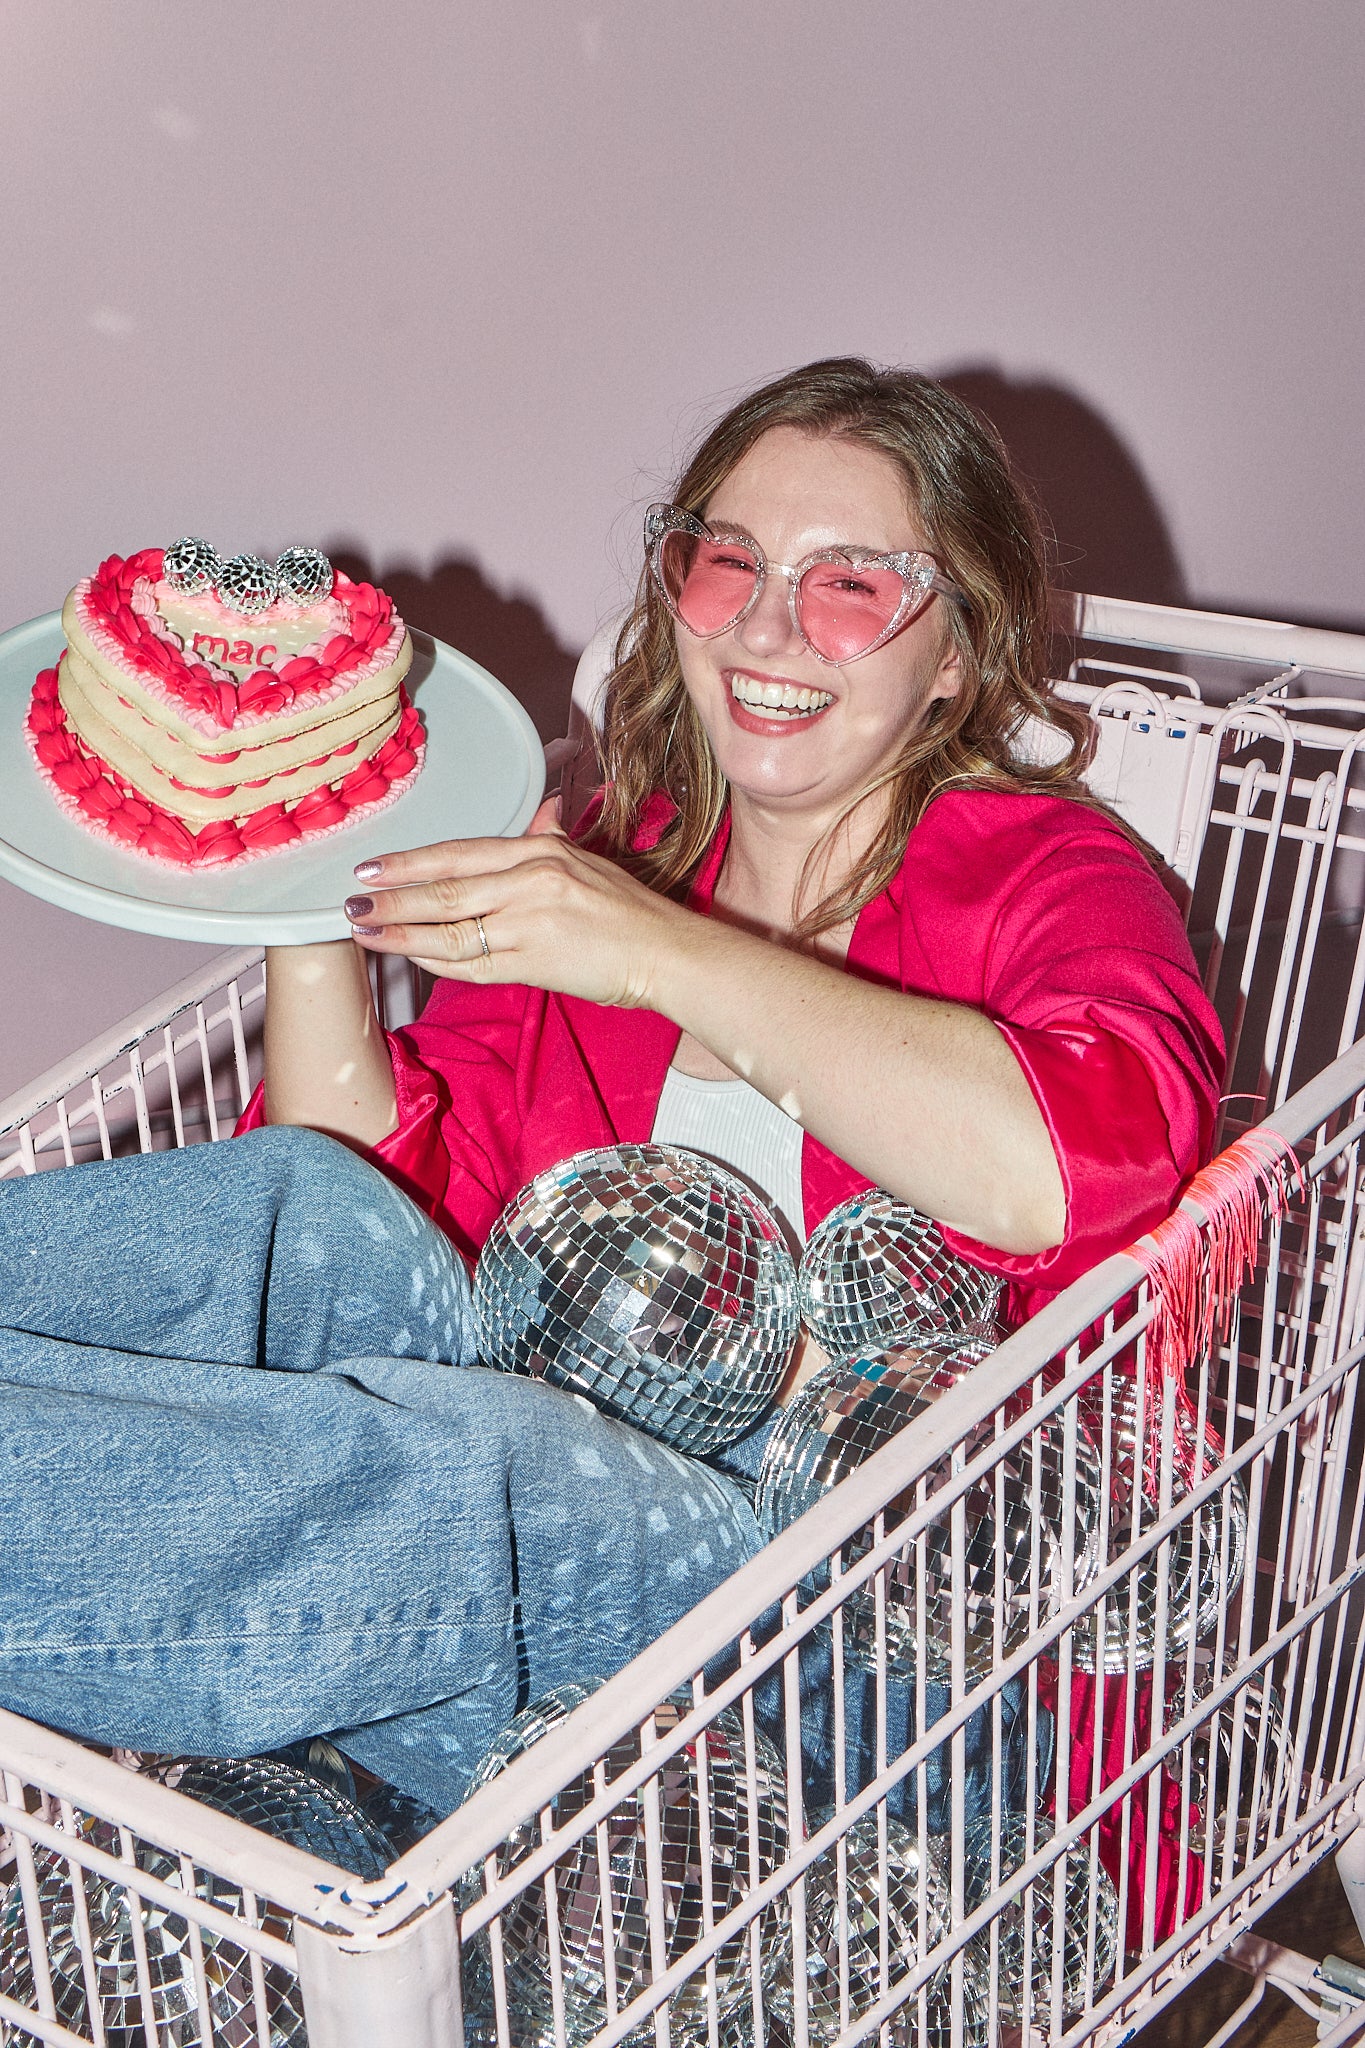 Maddie, owner and head baker of Maddie About Cake, is sitting in a light pink shopping cart surrounded by disco balls and holding a pink heart-shaped macaron cake topped with mini disco balls. She is smiling at the camera and wearing light pink heart-shaped glasses, a hot pink blazer with fringe, and blue jeans.